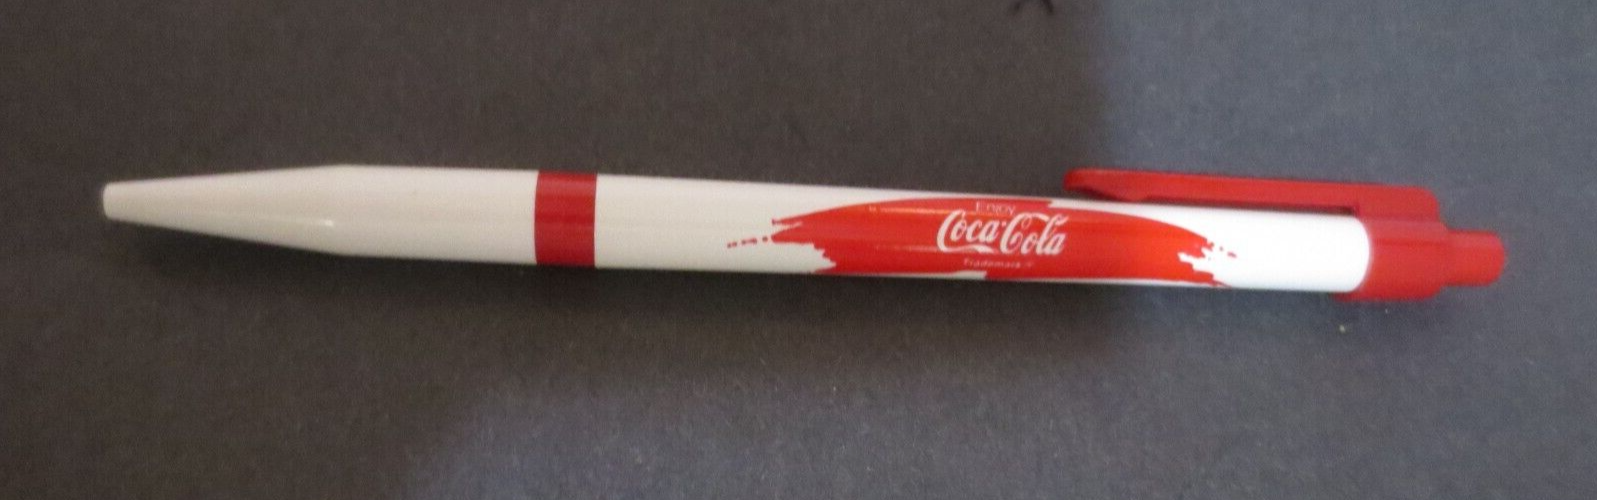 Coca-Cola Ballpoint Click Pin Ink has Dried Up - $0.99